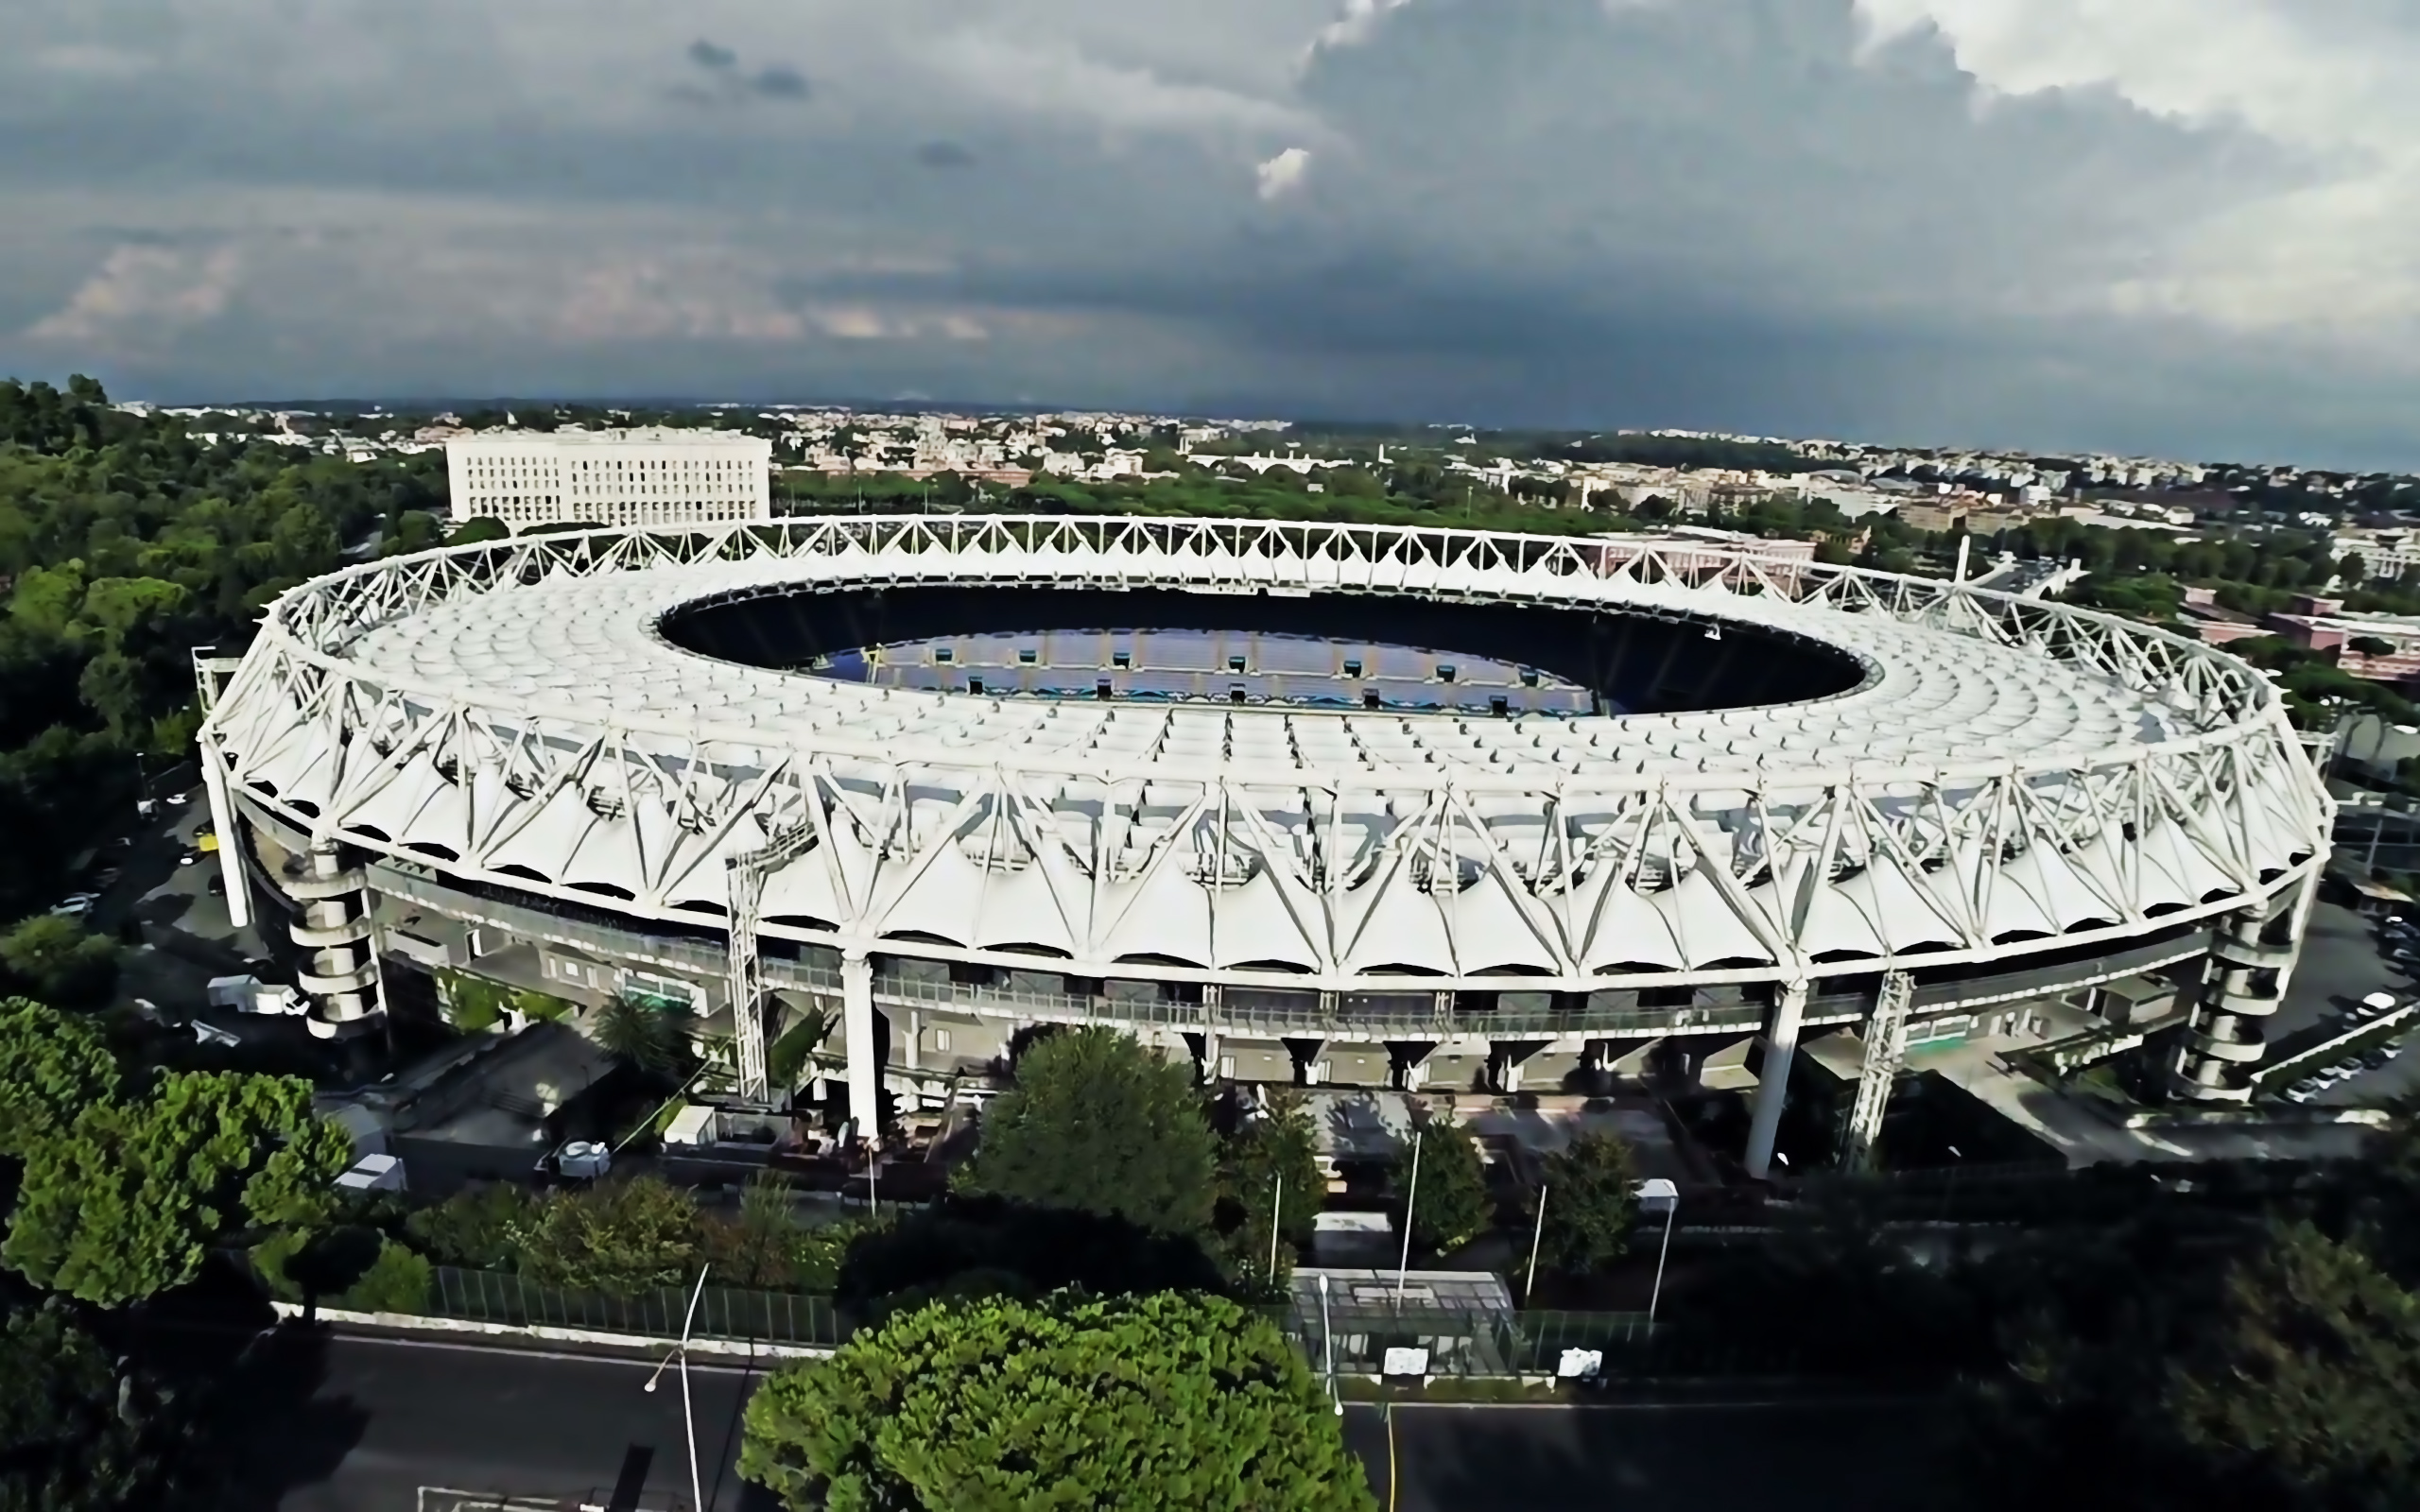 Download wallpaper Stadio Olimpico, Italian football stadium, Rome, Italy, sports arenas, AS Roma Stadium for desktop with resolution 2560x1600. High Quality HD picture wallpaper